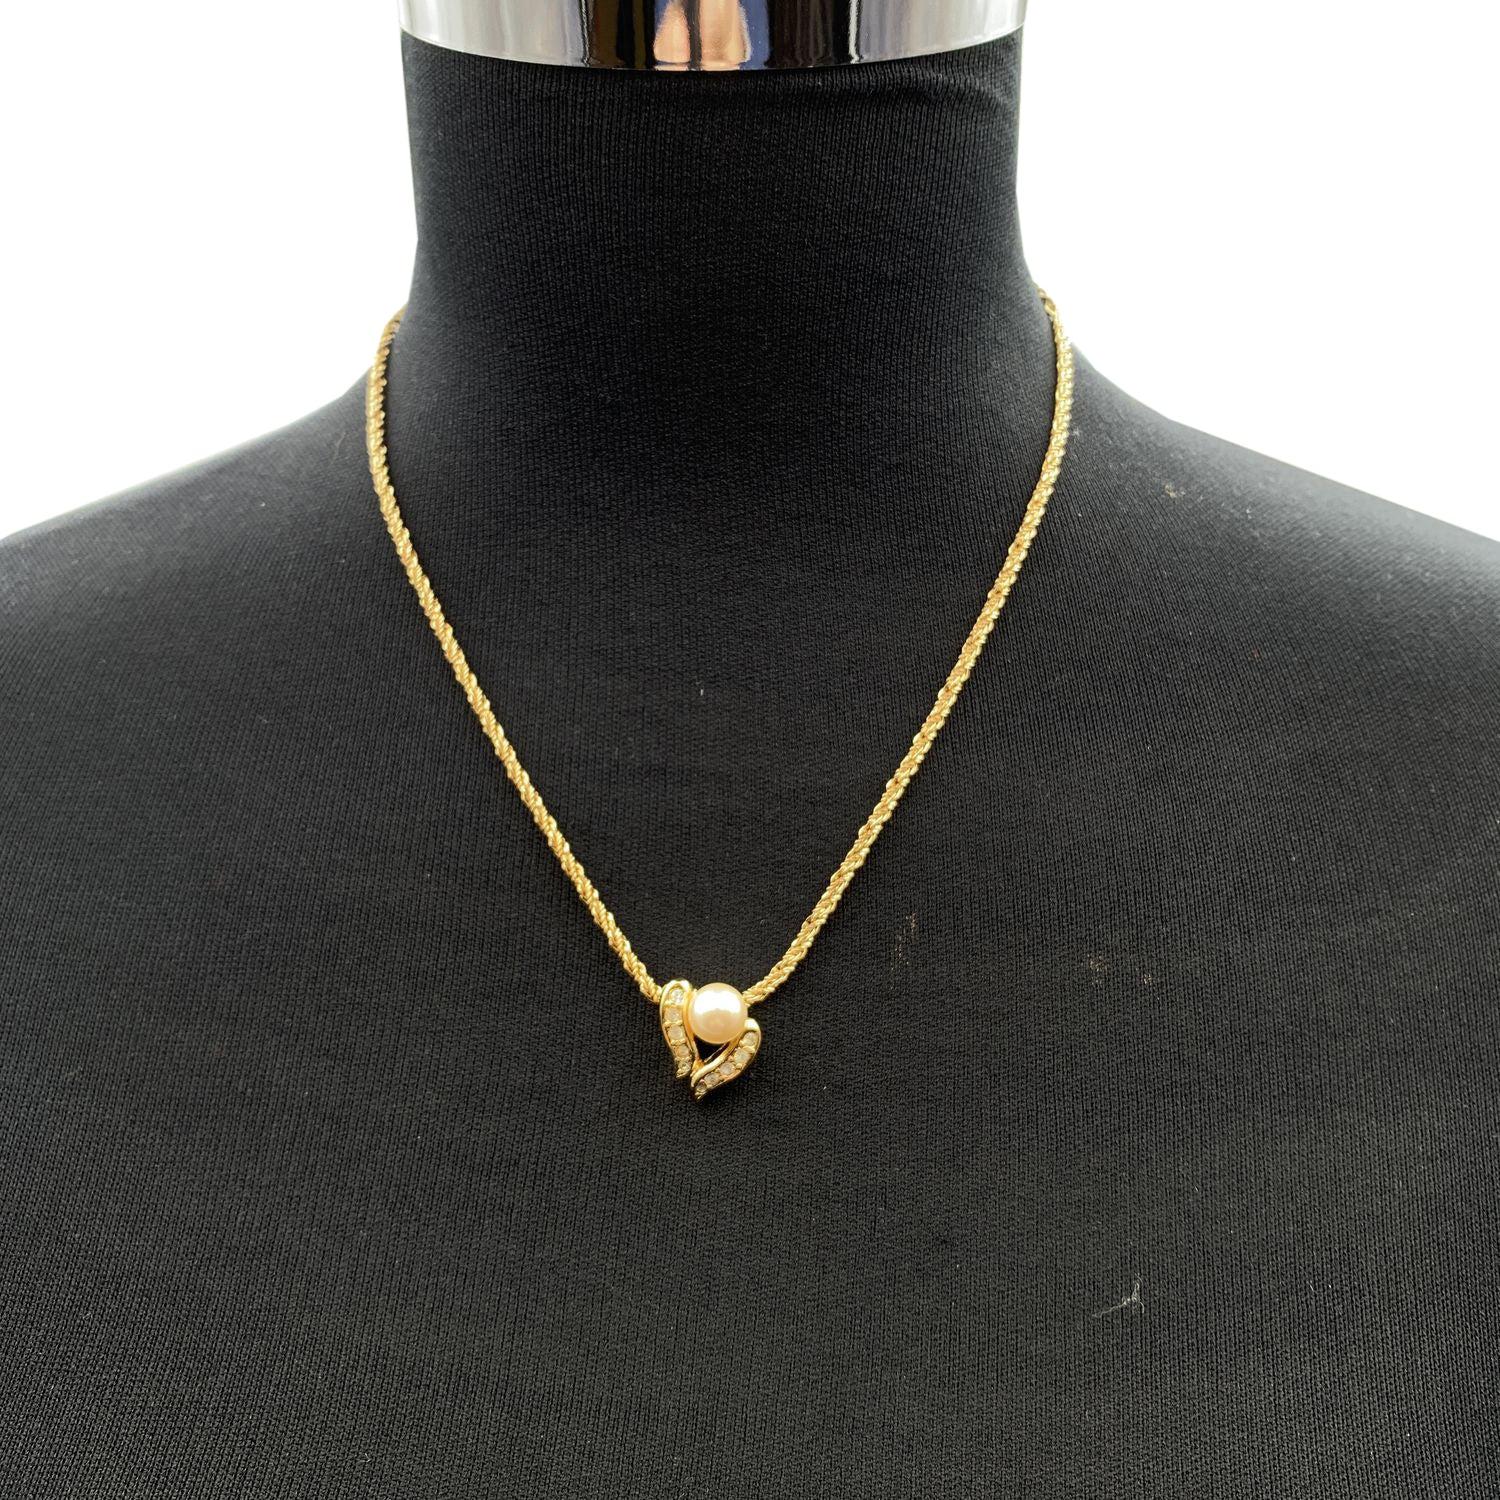 Vintage Christian Dior gold metal chain necklace. Zen style, soothing shape, this pendant is mounted with a pearl, gold metal elements with cystal embellishment (marked Dior on its reverse). Lobster closure. CD small charm at the end of the chain.